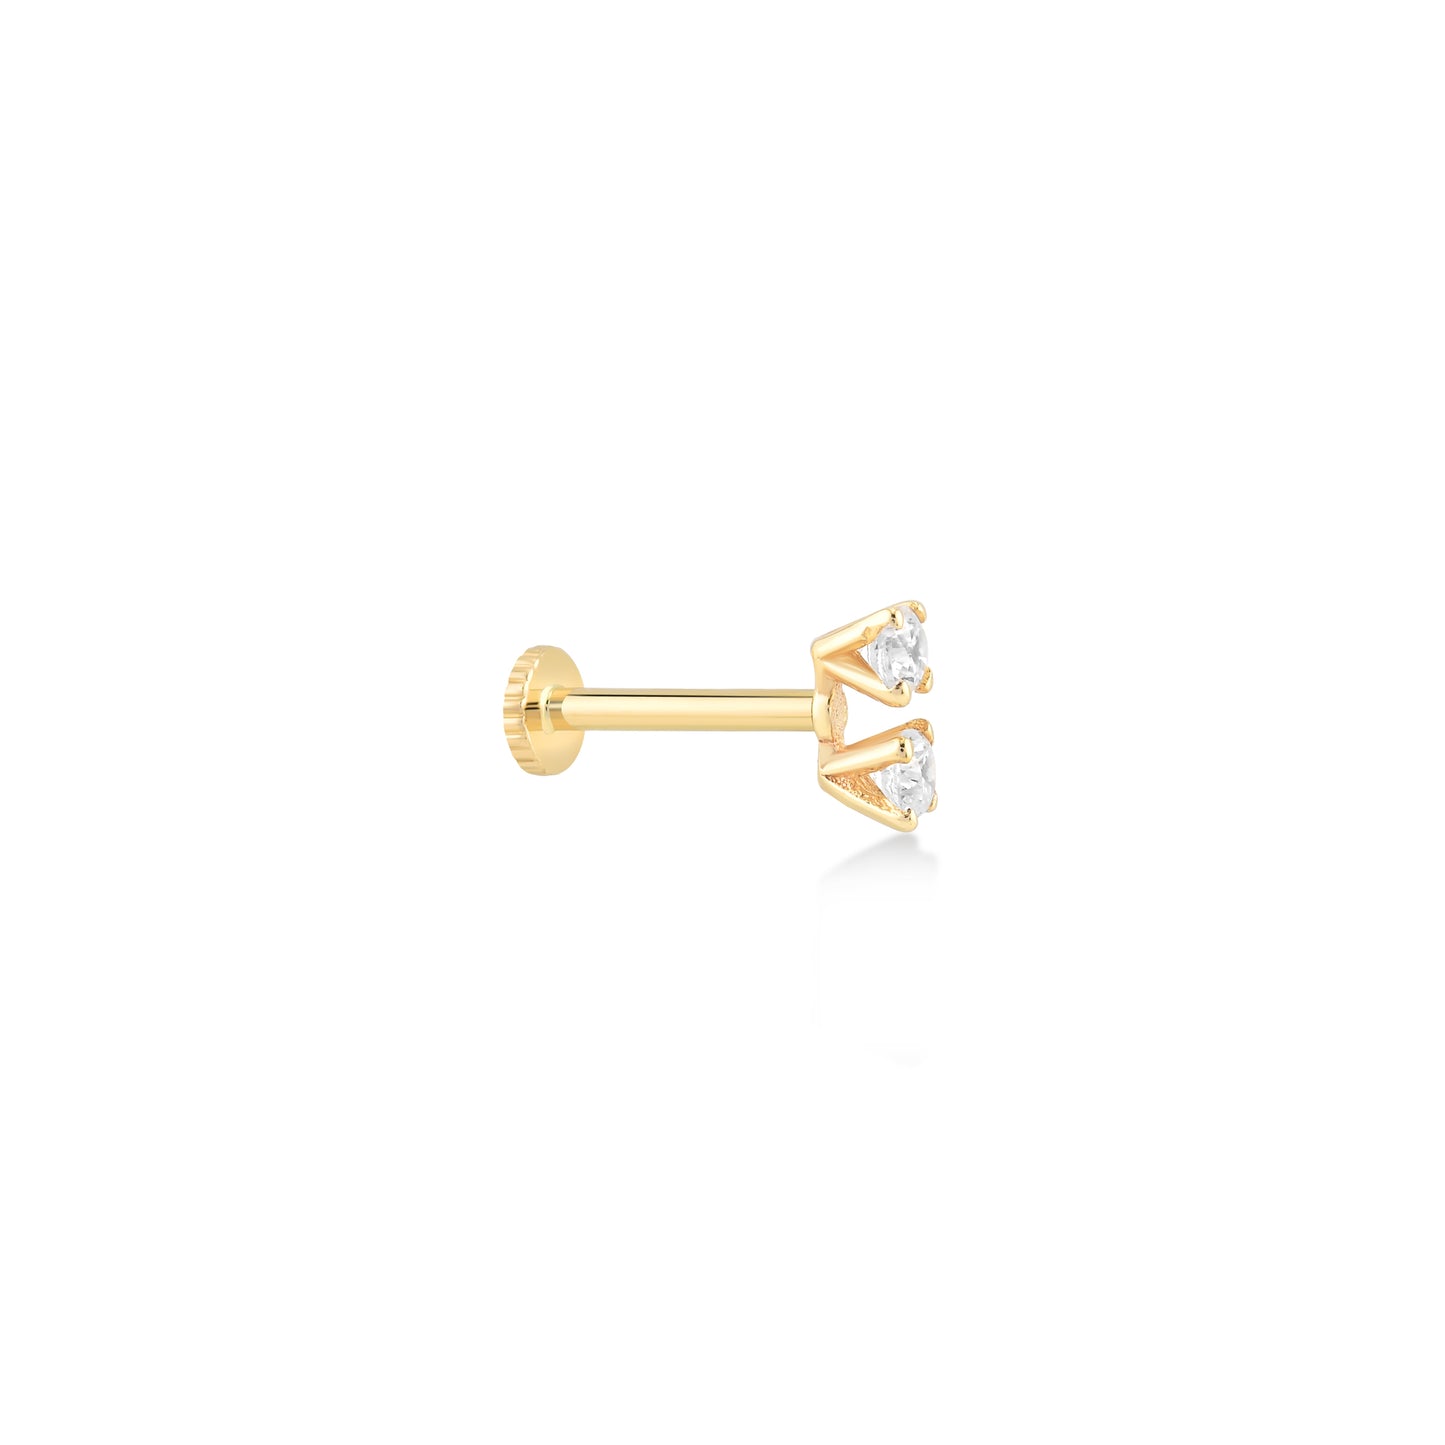 Dual Stone Gold Piercing for Multi-Purpose Ear Styling